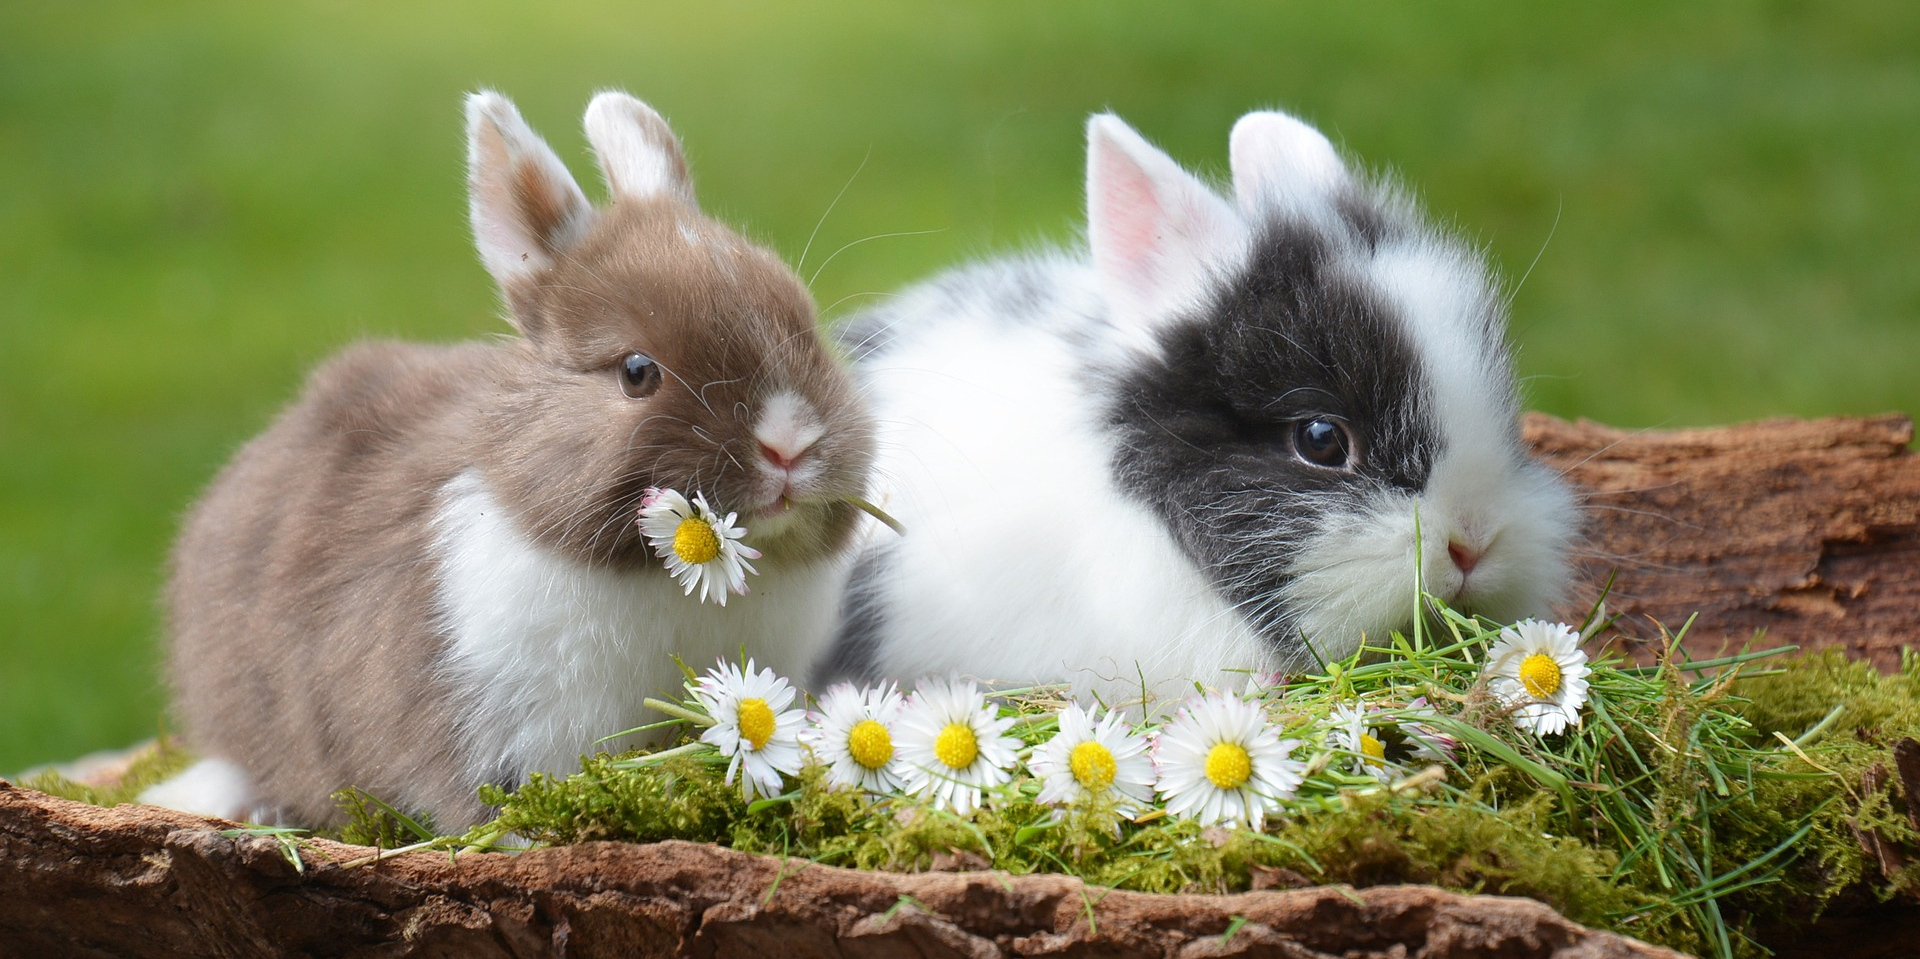 two spring bunnies on garden lawn eating dasies - april lawn care tips and advice